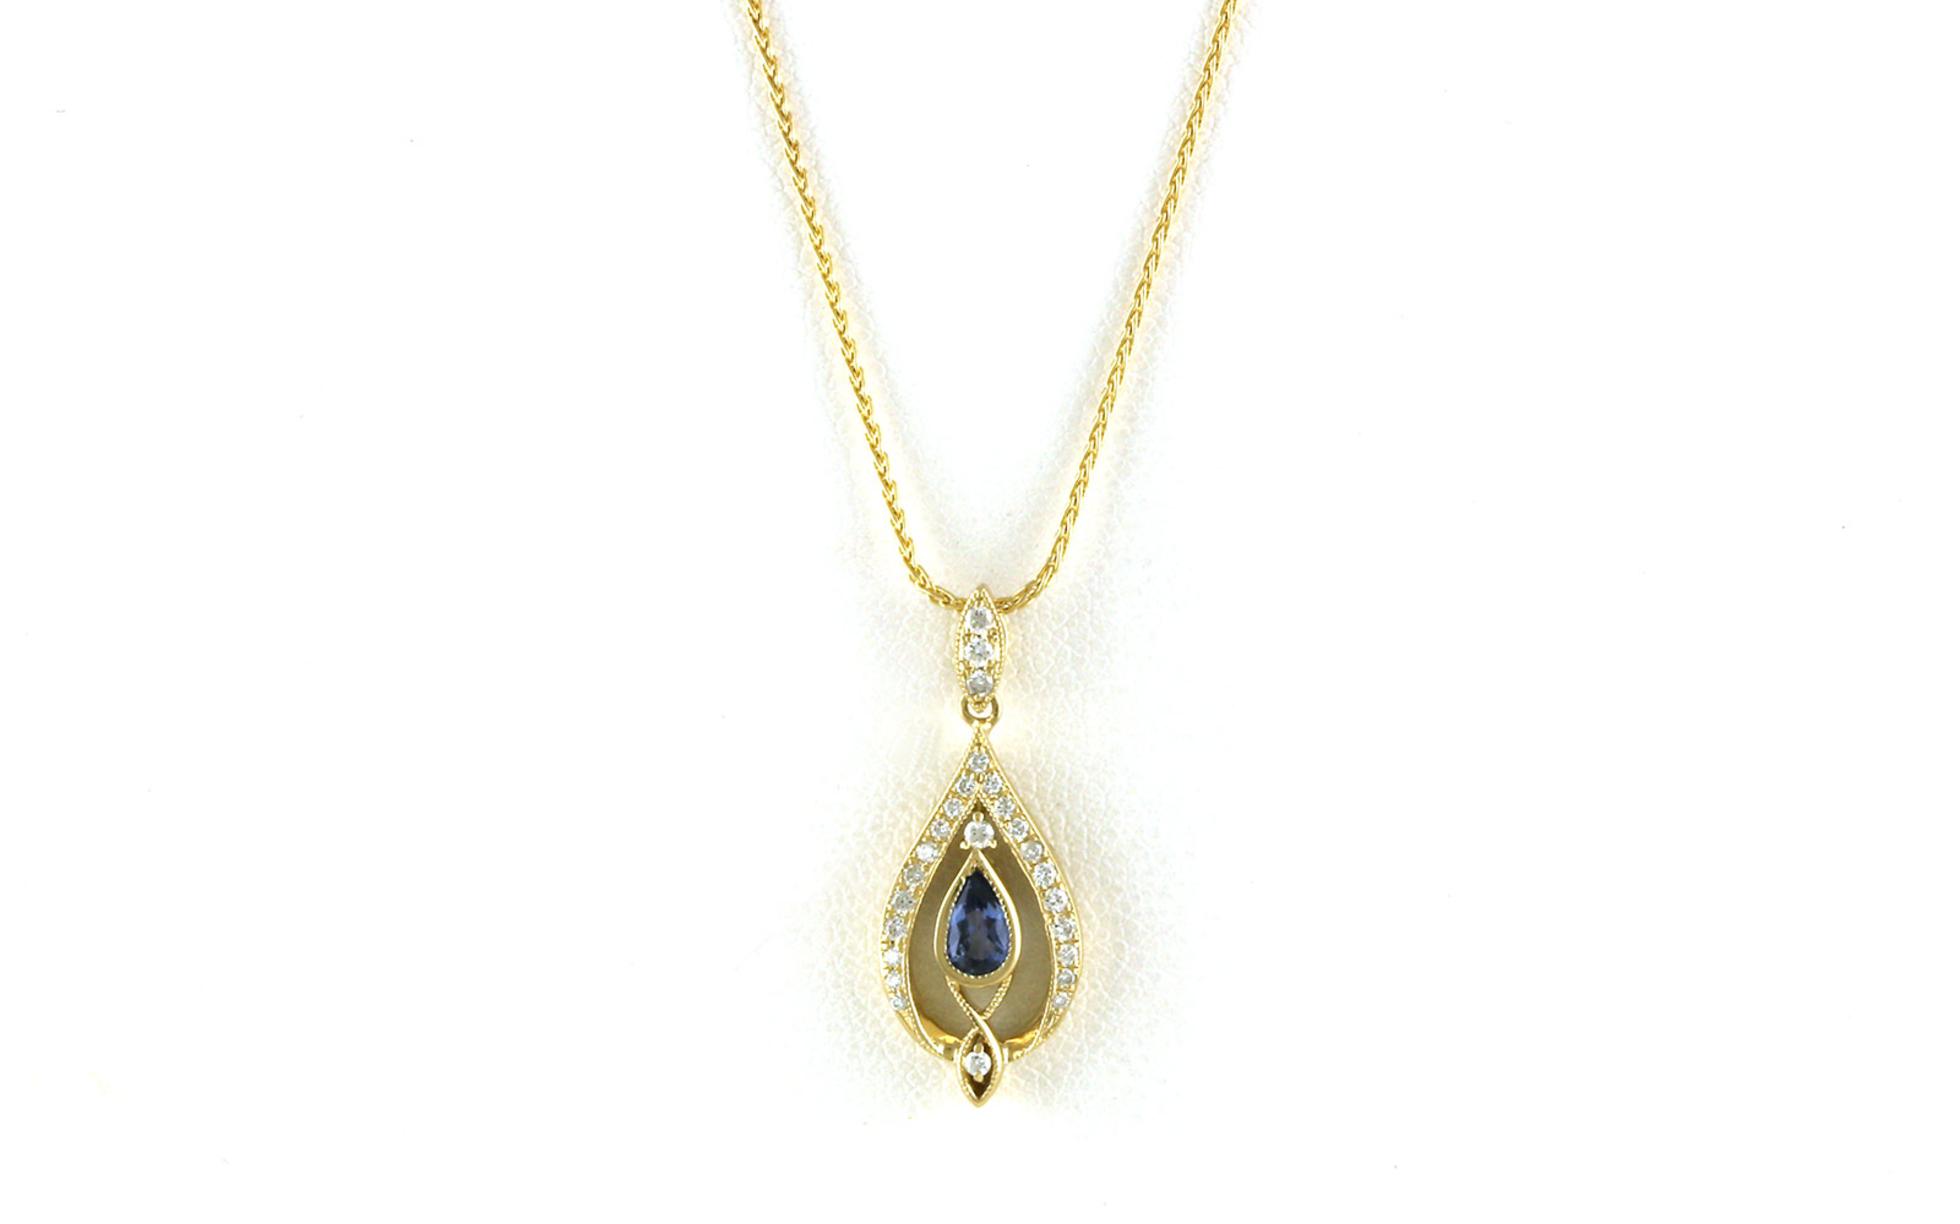 Teardrop-style Pear-cut Montana Yogo Sapphire Necklace with Diamonds in Yellow Gold (0.35cts TWT)